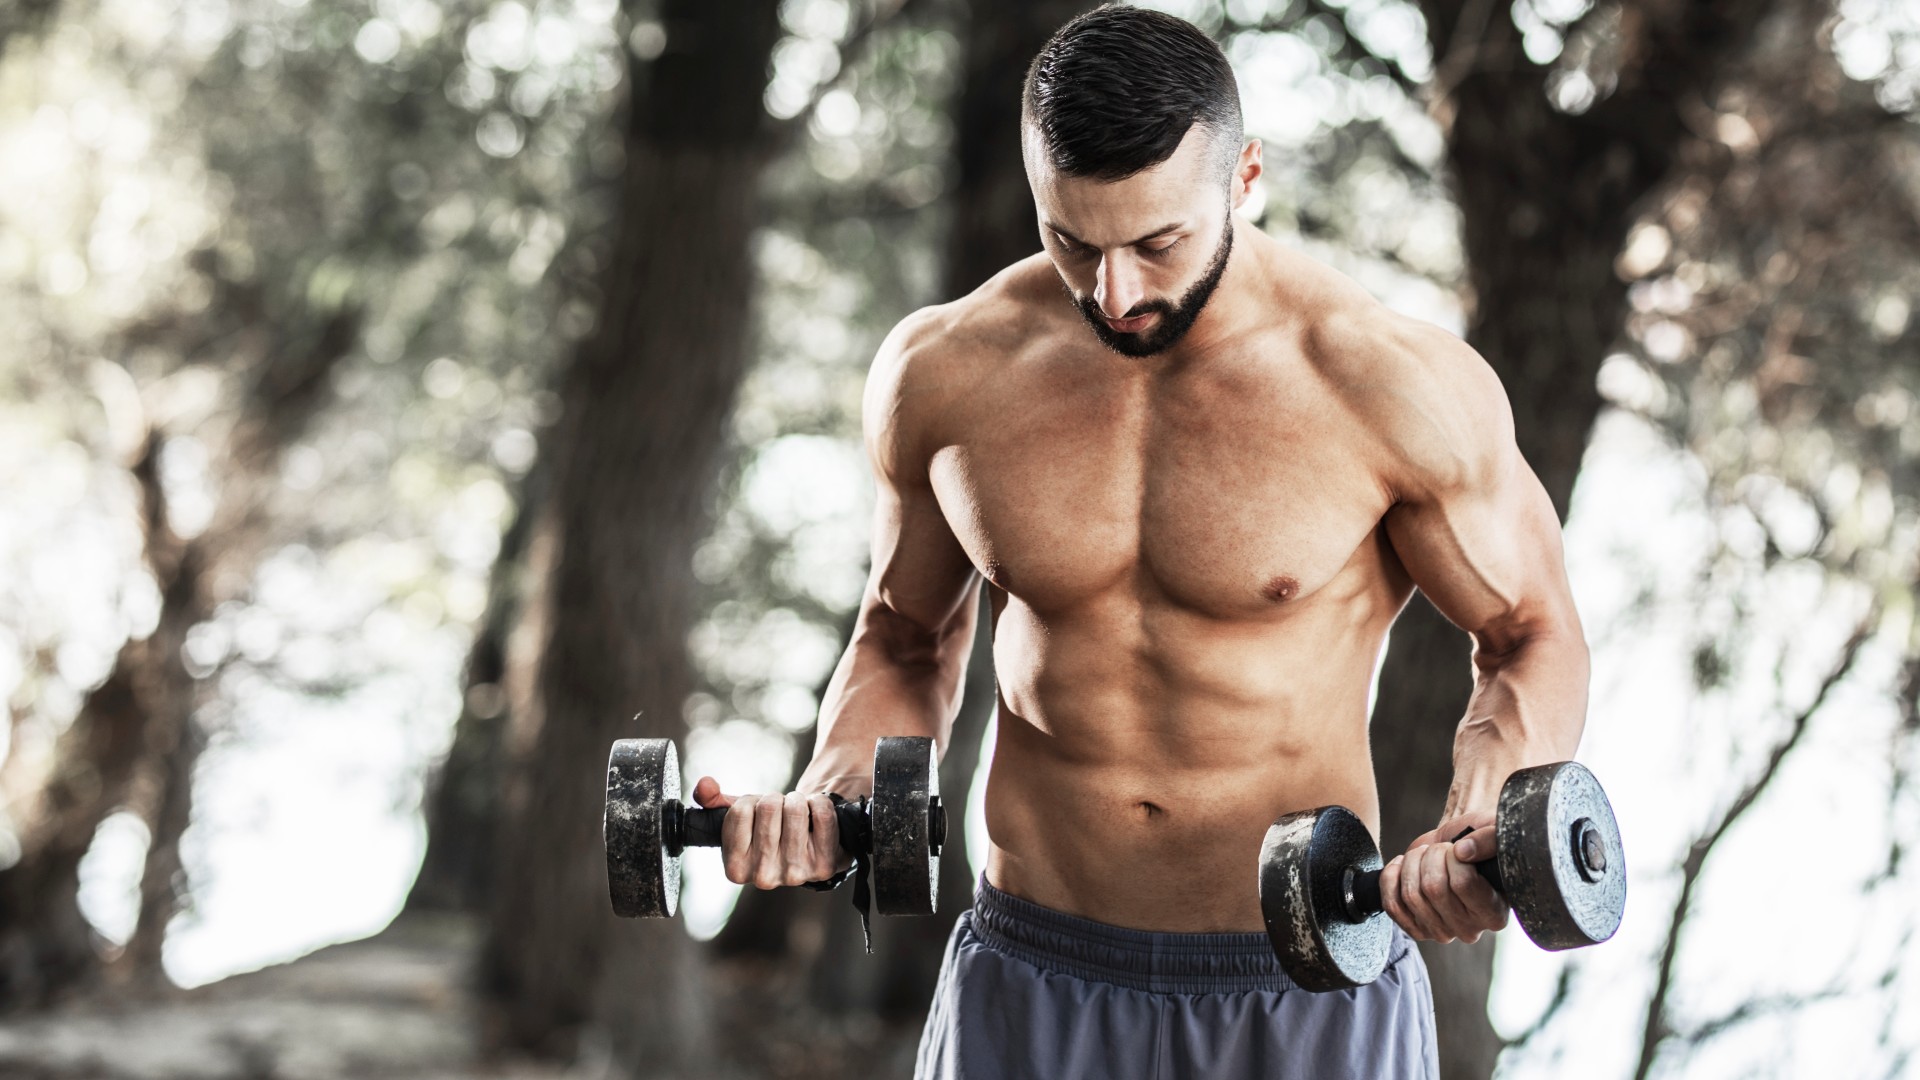 Chisel strong pecs and triceps with this 3-move dumbbell chest